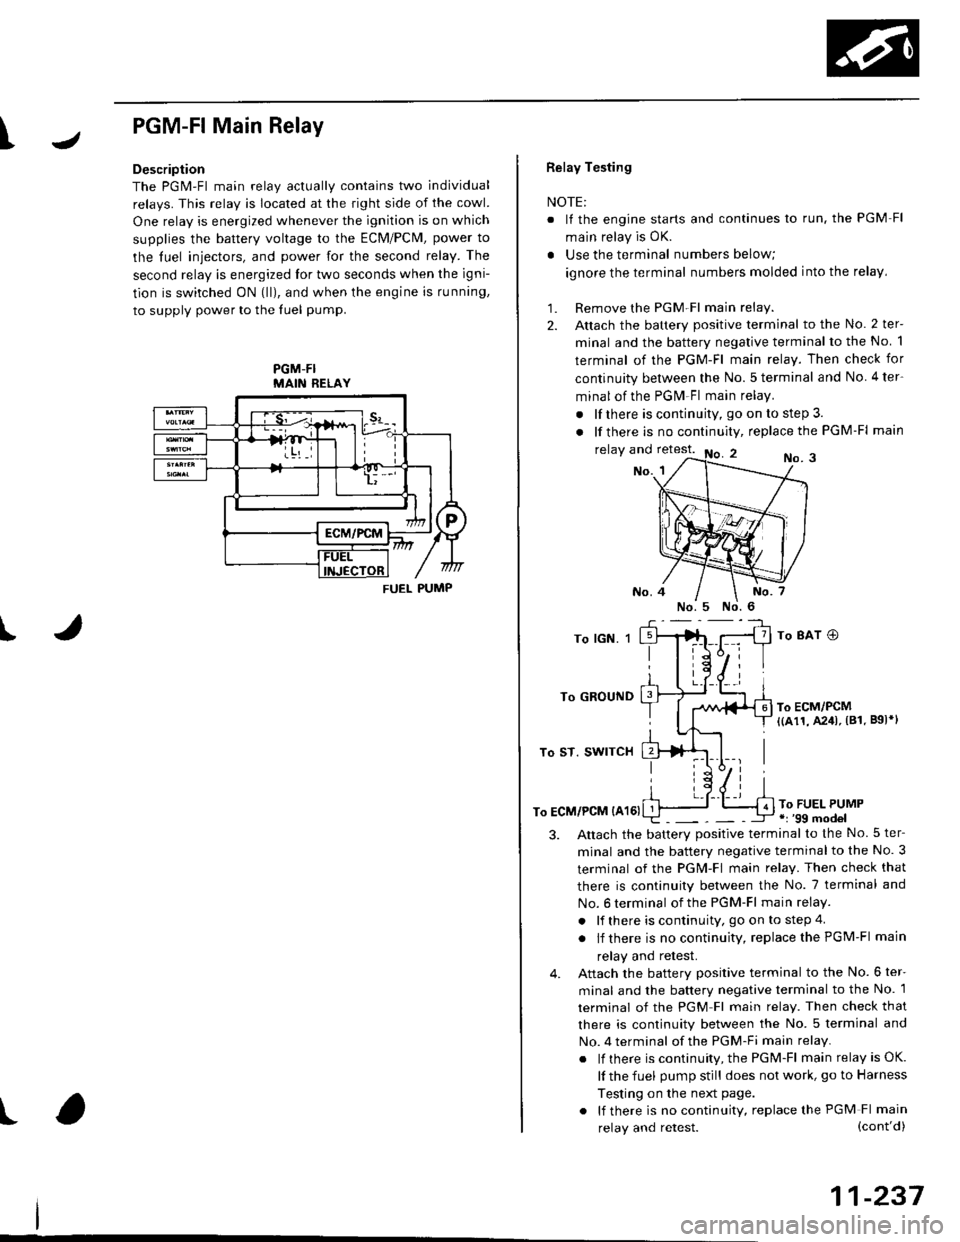 HONDA CIVIC 2000 6.G Service Manual I
PGM-FlMain Relay
Description
The PGM-Fl main relav actuallv contains two individual
relays. This relay is located at the right side of the cowl.
One relay is energized whenever the ignition is on wh